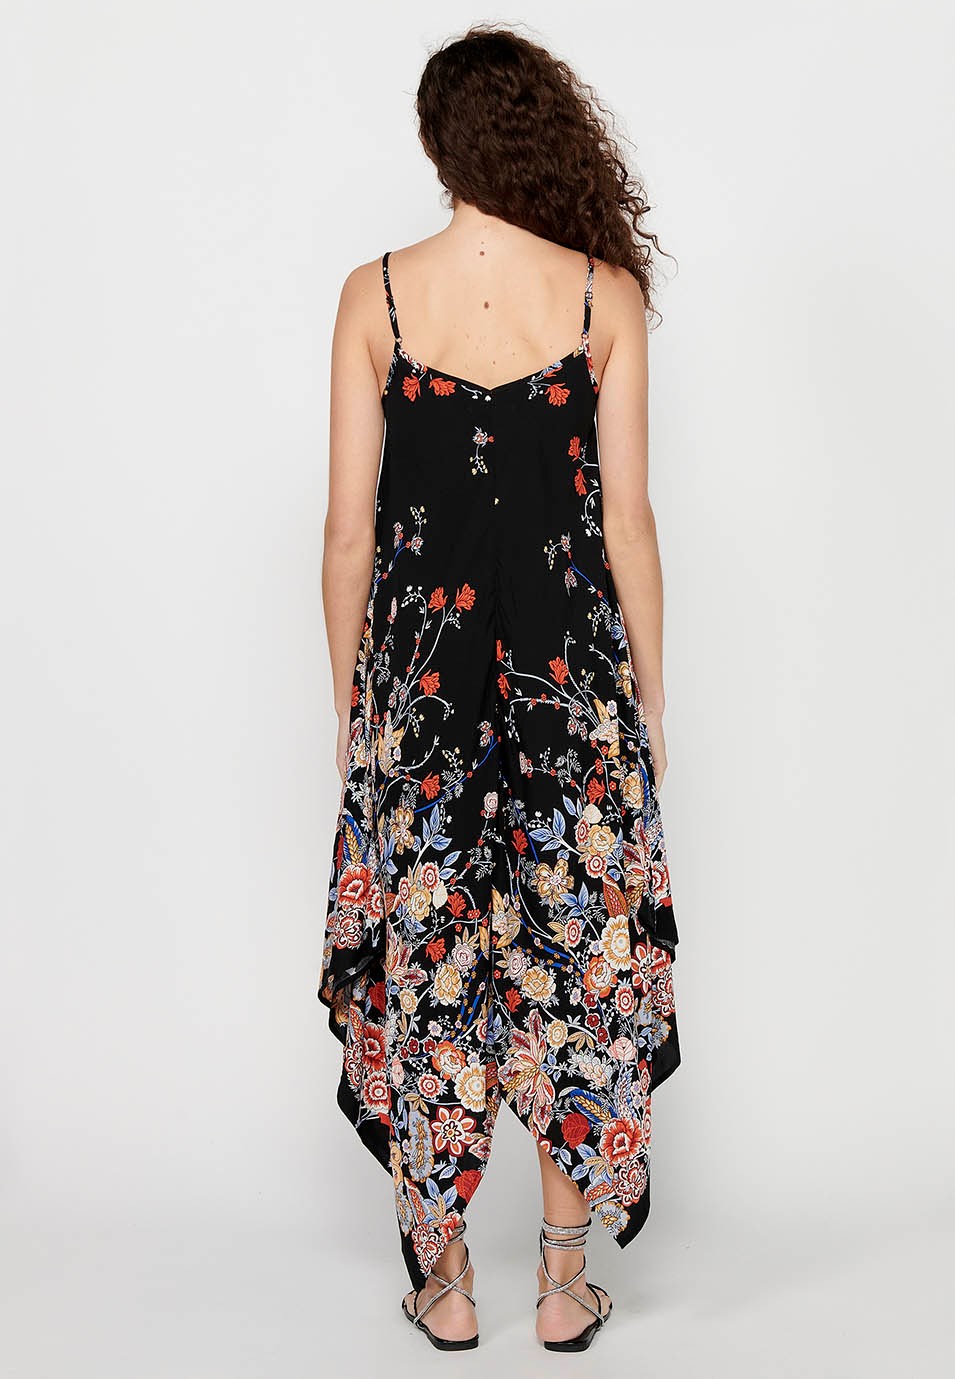 Strap Dress with V-neck and Black Floral Print for Women 7